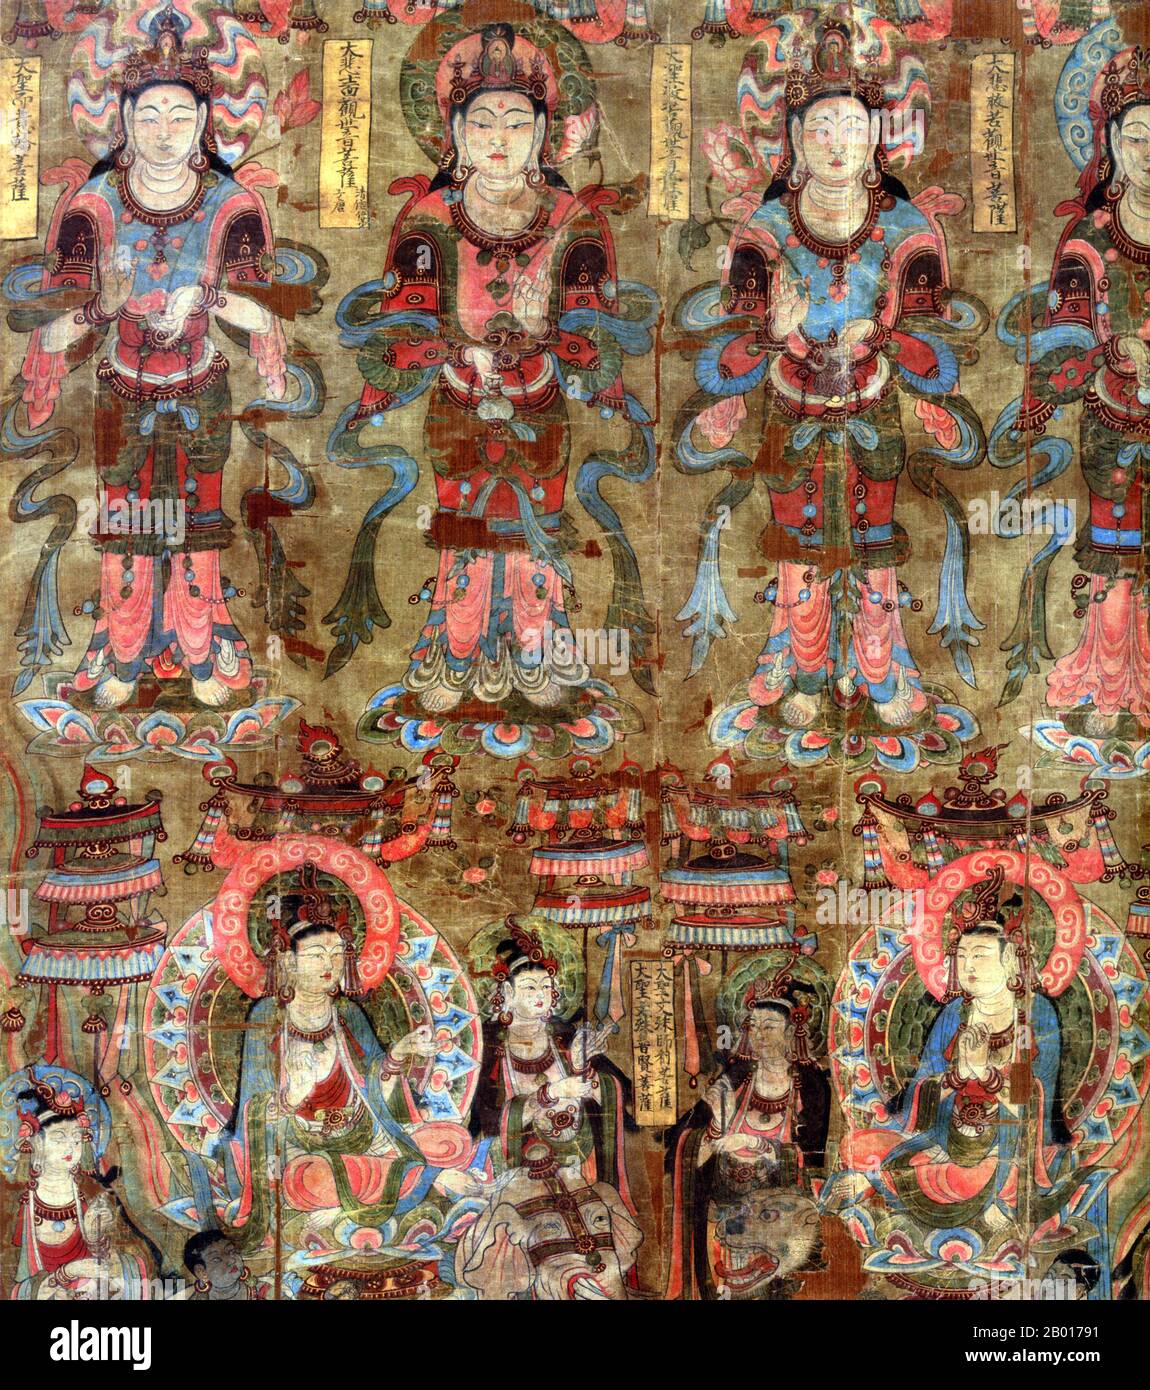 China: Four manifestations of the Bodhisattva Avalokitesvara above Samantabhadra and Manjusri. Silk painting, Mogao Caves, Dunhuang, 864 CE.  Avalokiteśvara (Sanskrit: 'Lord who looks down') is a bodhisattva who embodies the compassion of all Buddhas. He is one of the most widely revered bodhisattvas in mainstream Mahayana Buddhism. The Chinese name for Avalokitasvara is Guānshyīn (Guanyin, Goddess of Mercy), and is generally represented as female. Mañjuśrī is a bodhisattva associated with transcendent wisdom (Sanskrit. prajñā) in Mahāyāna Buddhism. Stock Photo